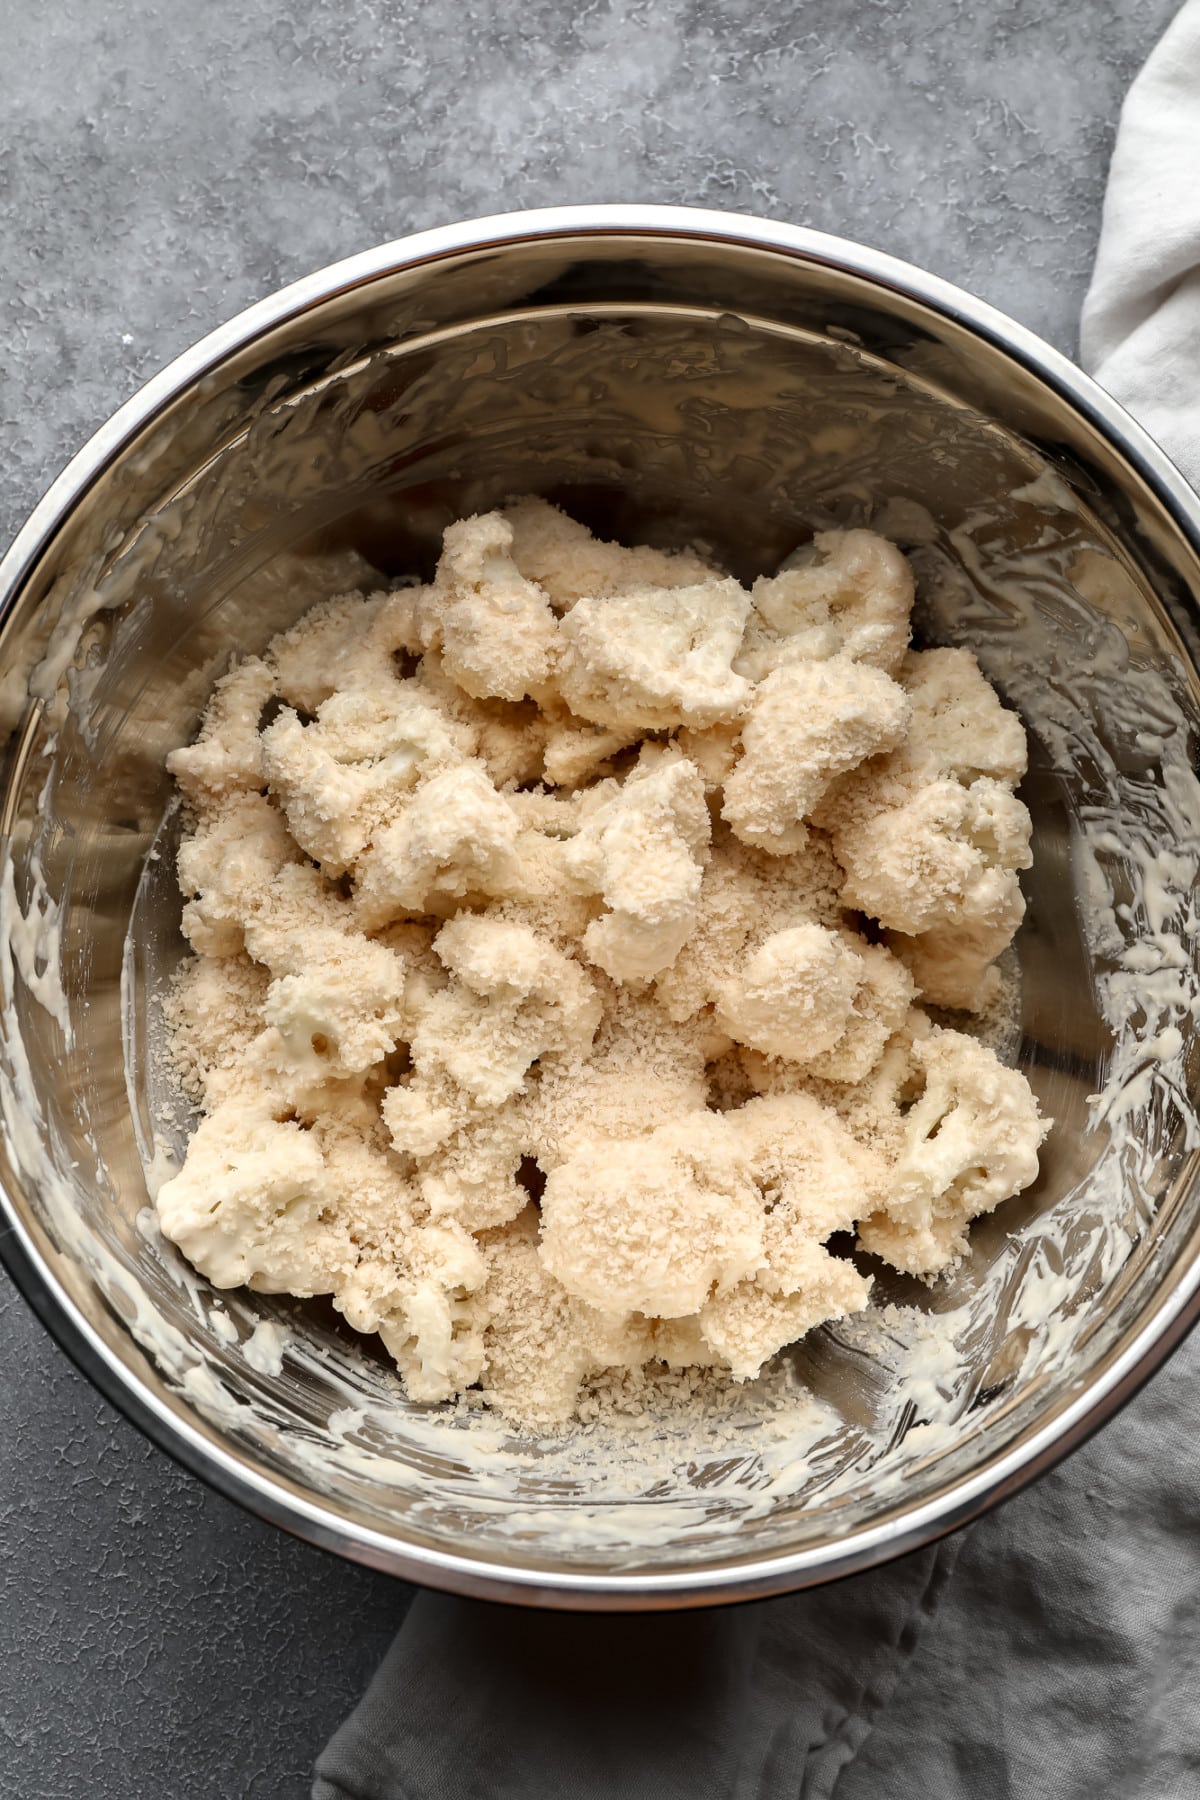 cauliflower florets mixed with flour mixture and breadcrumbs in silver bowl